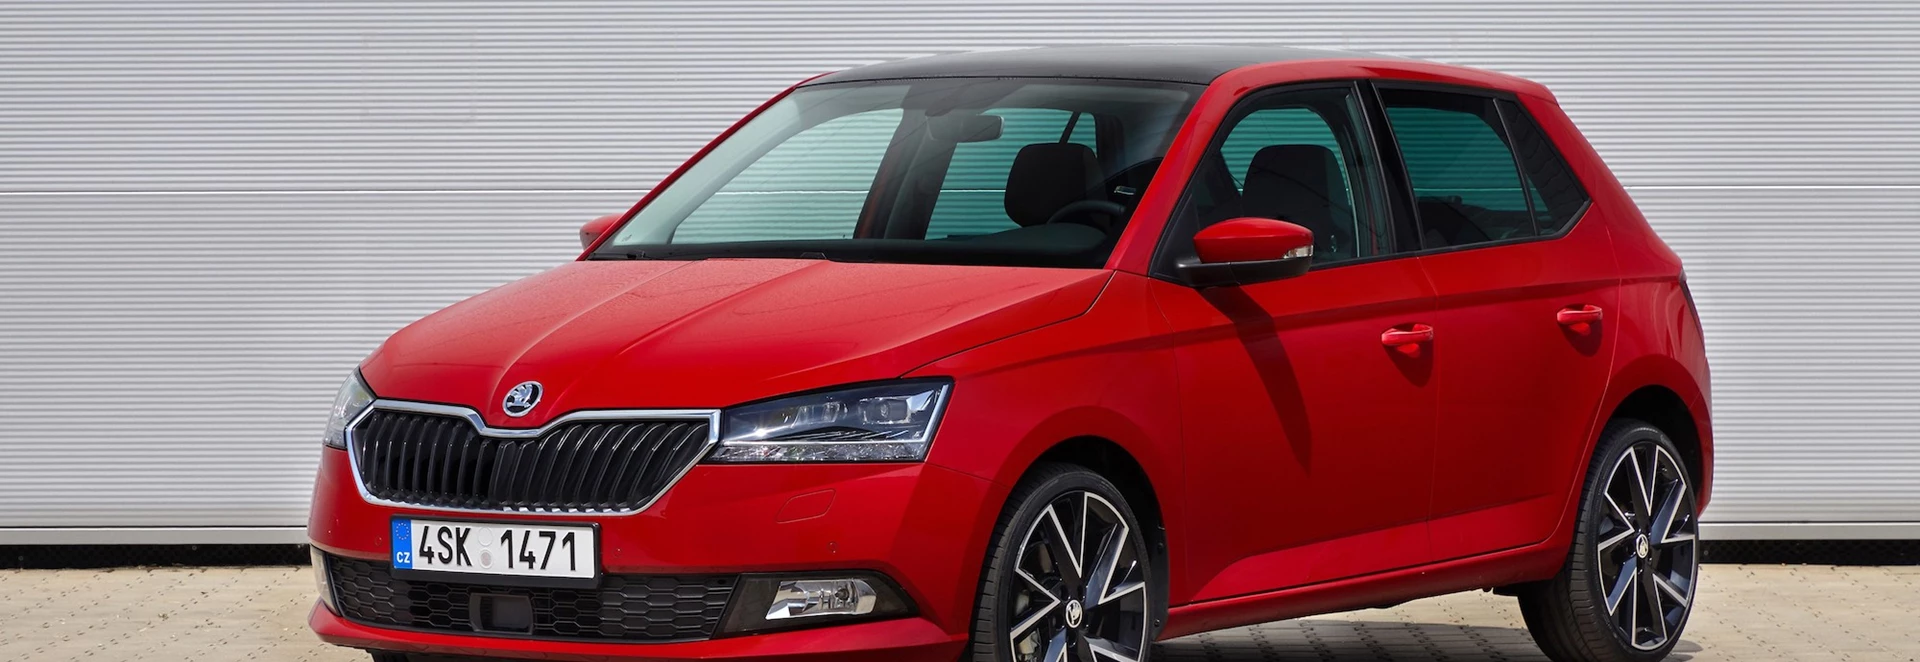 2020 Skoda Fabia revealed with a whole lot more kit 